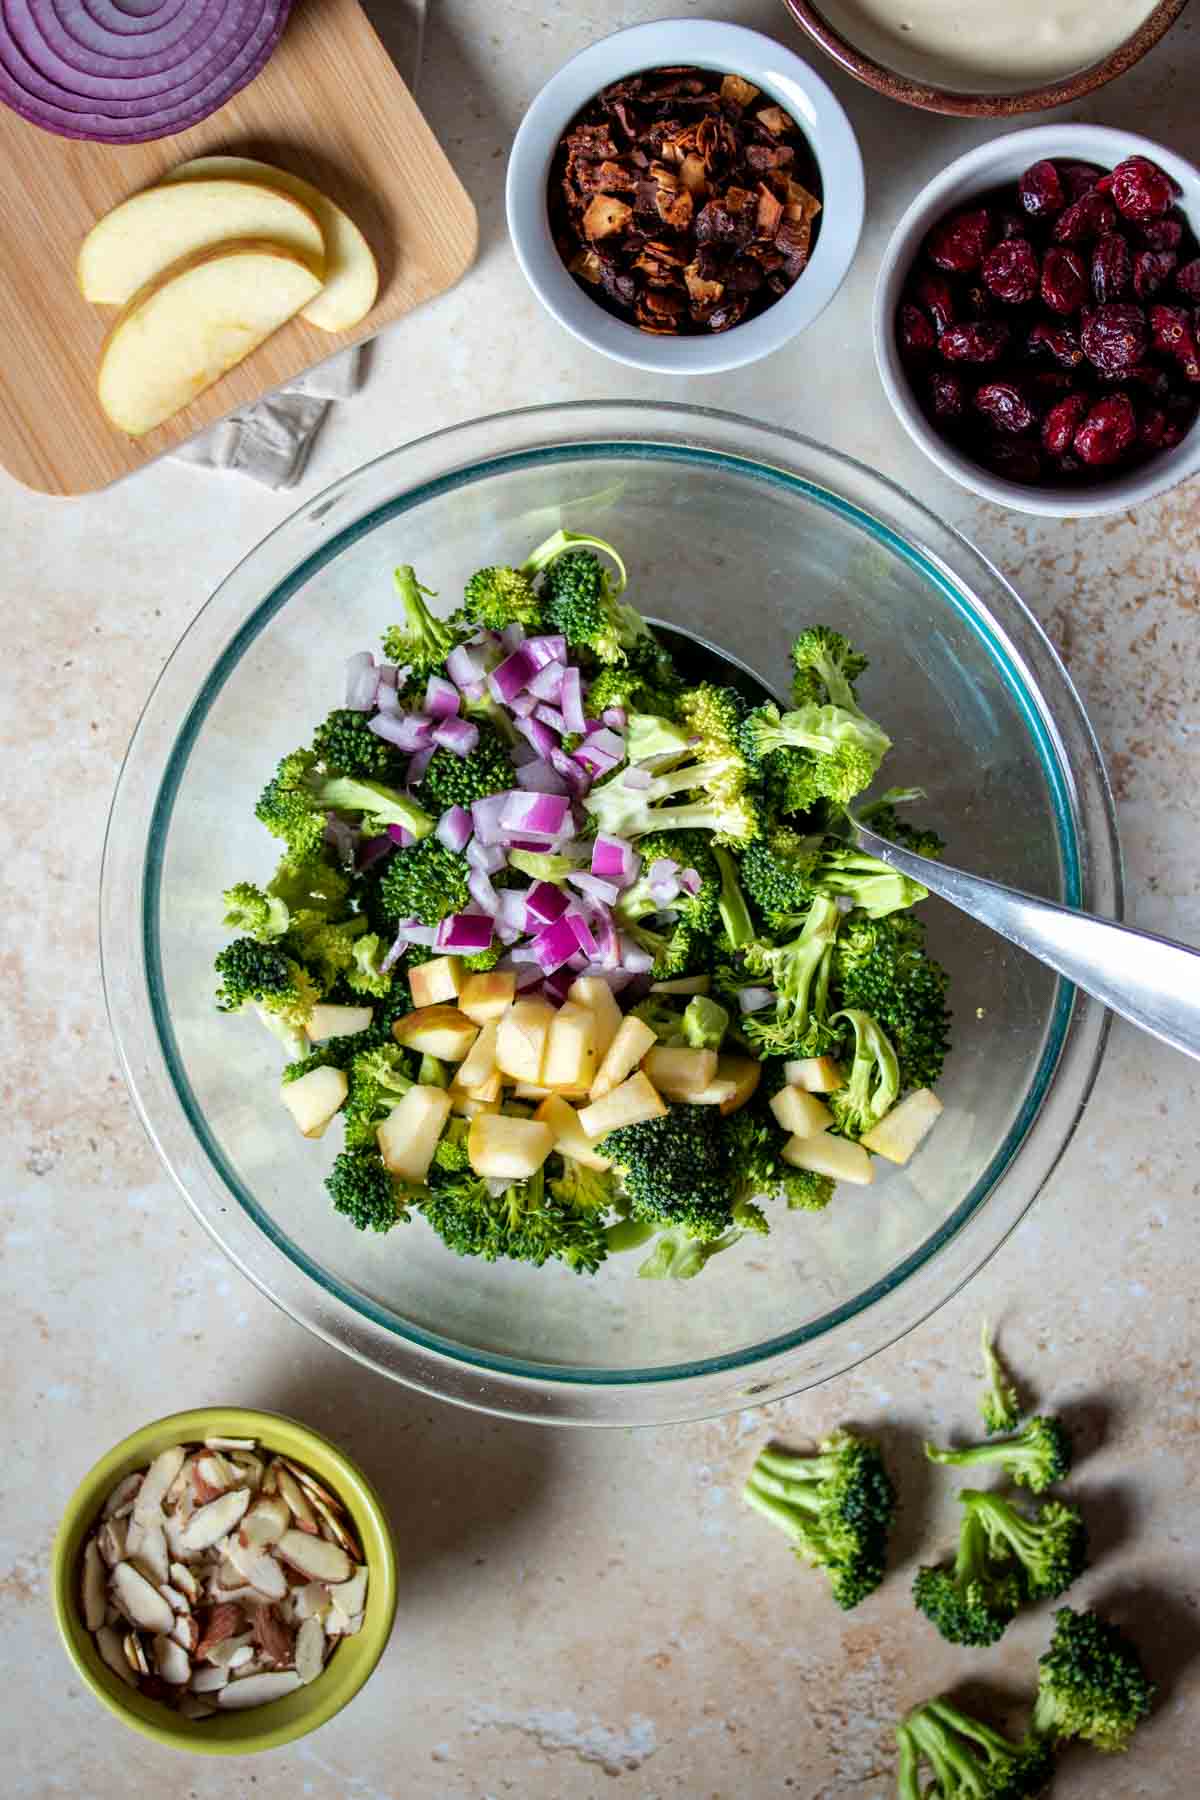 Chopped apples, red onion and broccoli in a glass bowl next to bowls of ingredients for a broccoli salad.